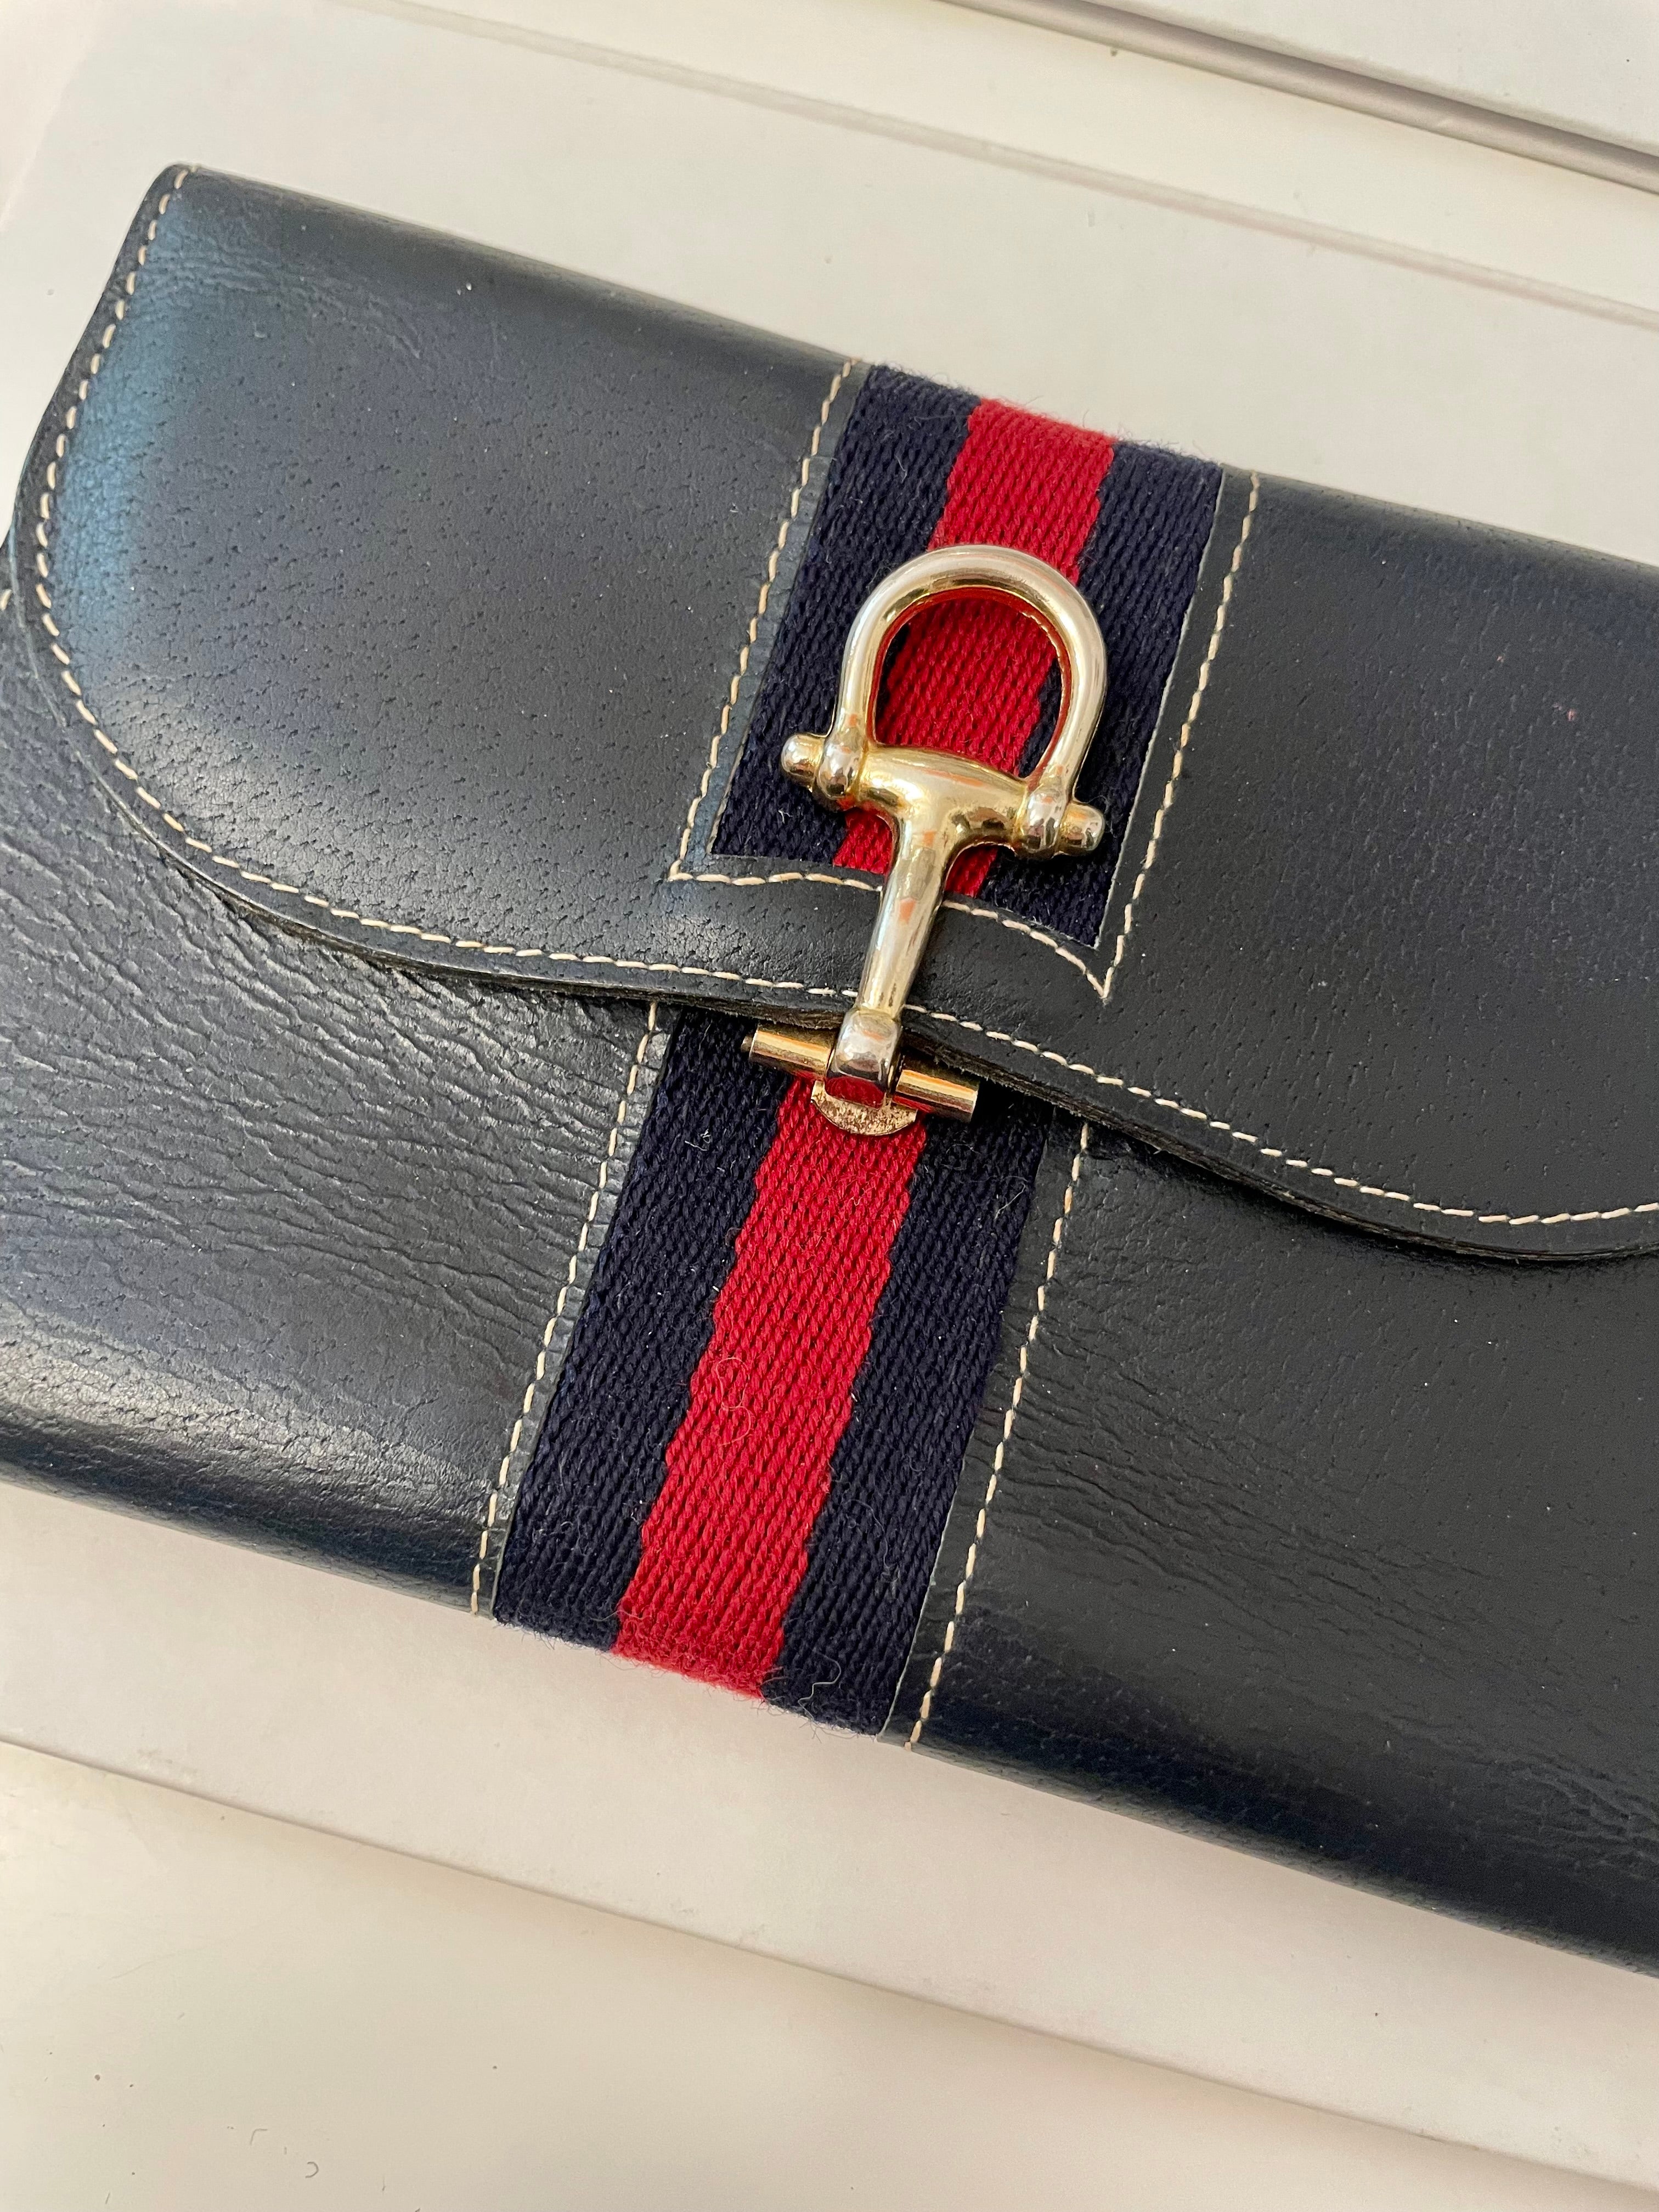 The Preppy Girl Society... they love the classic navy, and red story... This wallet brings their love for that color palette to whole new level!